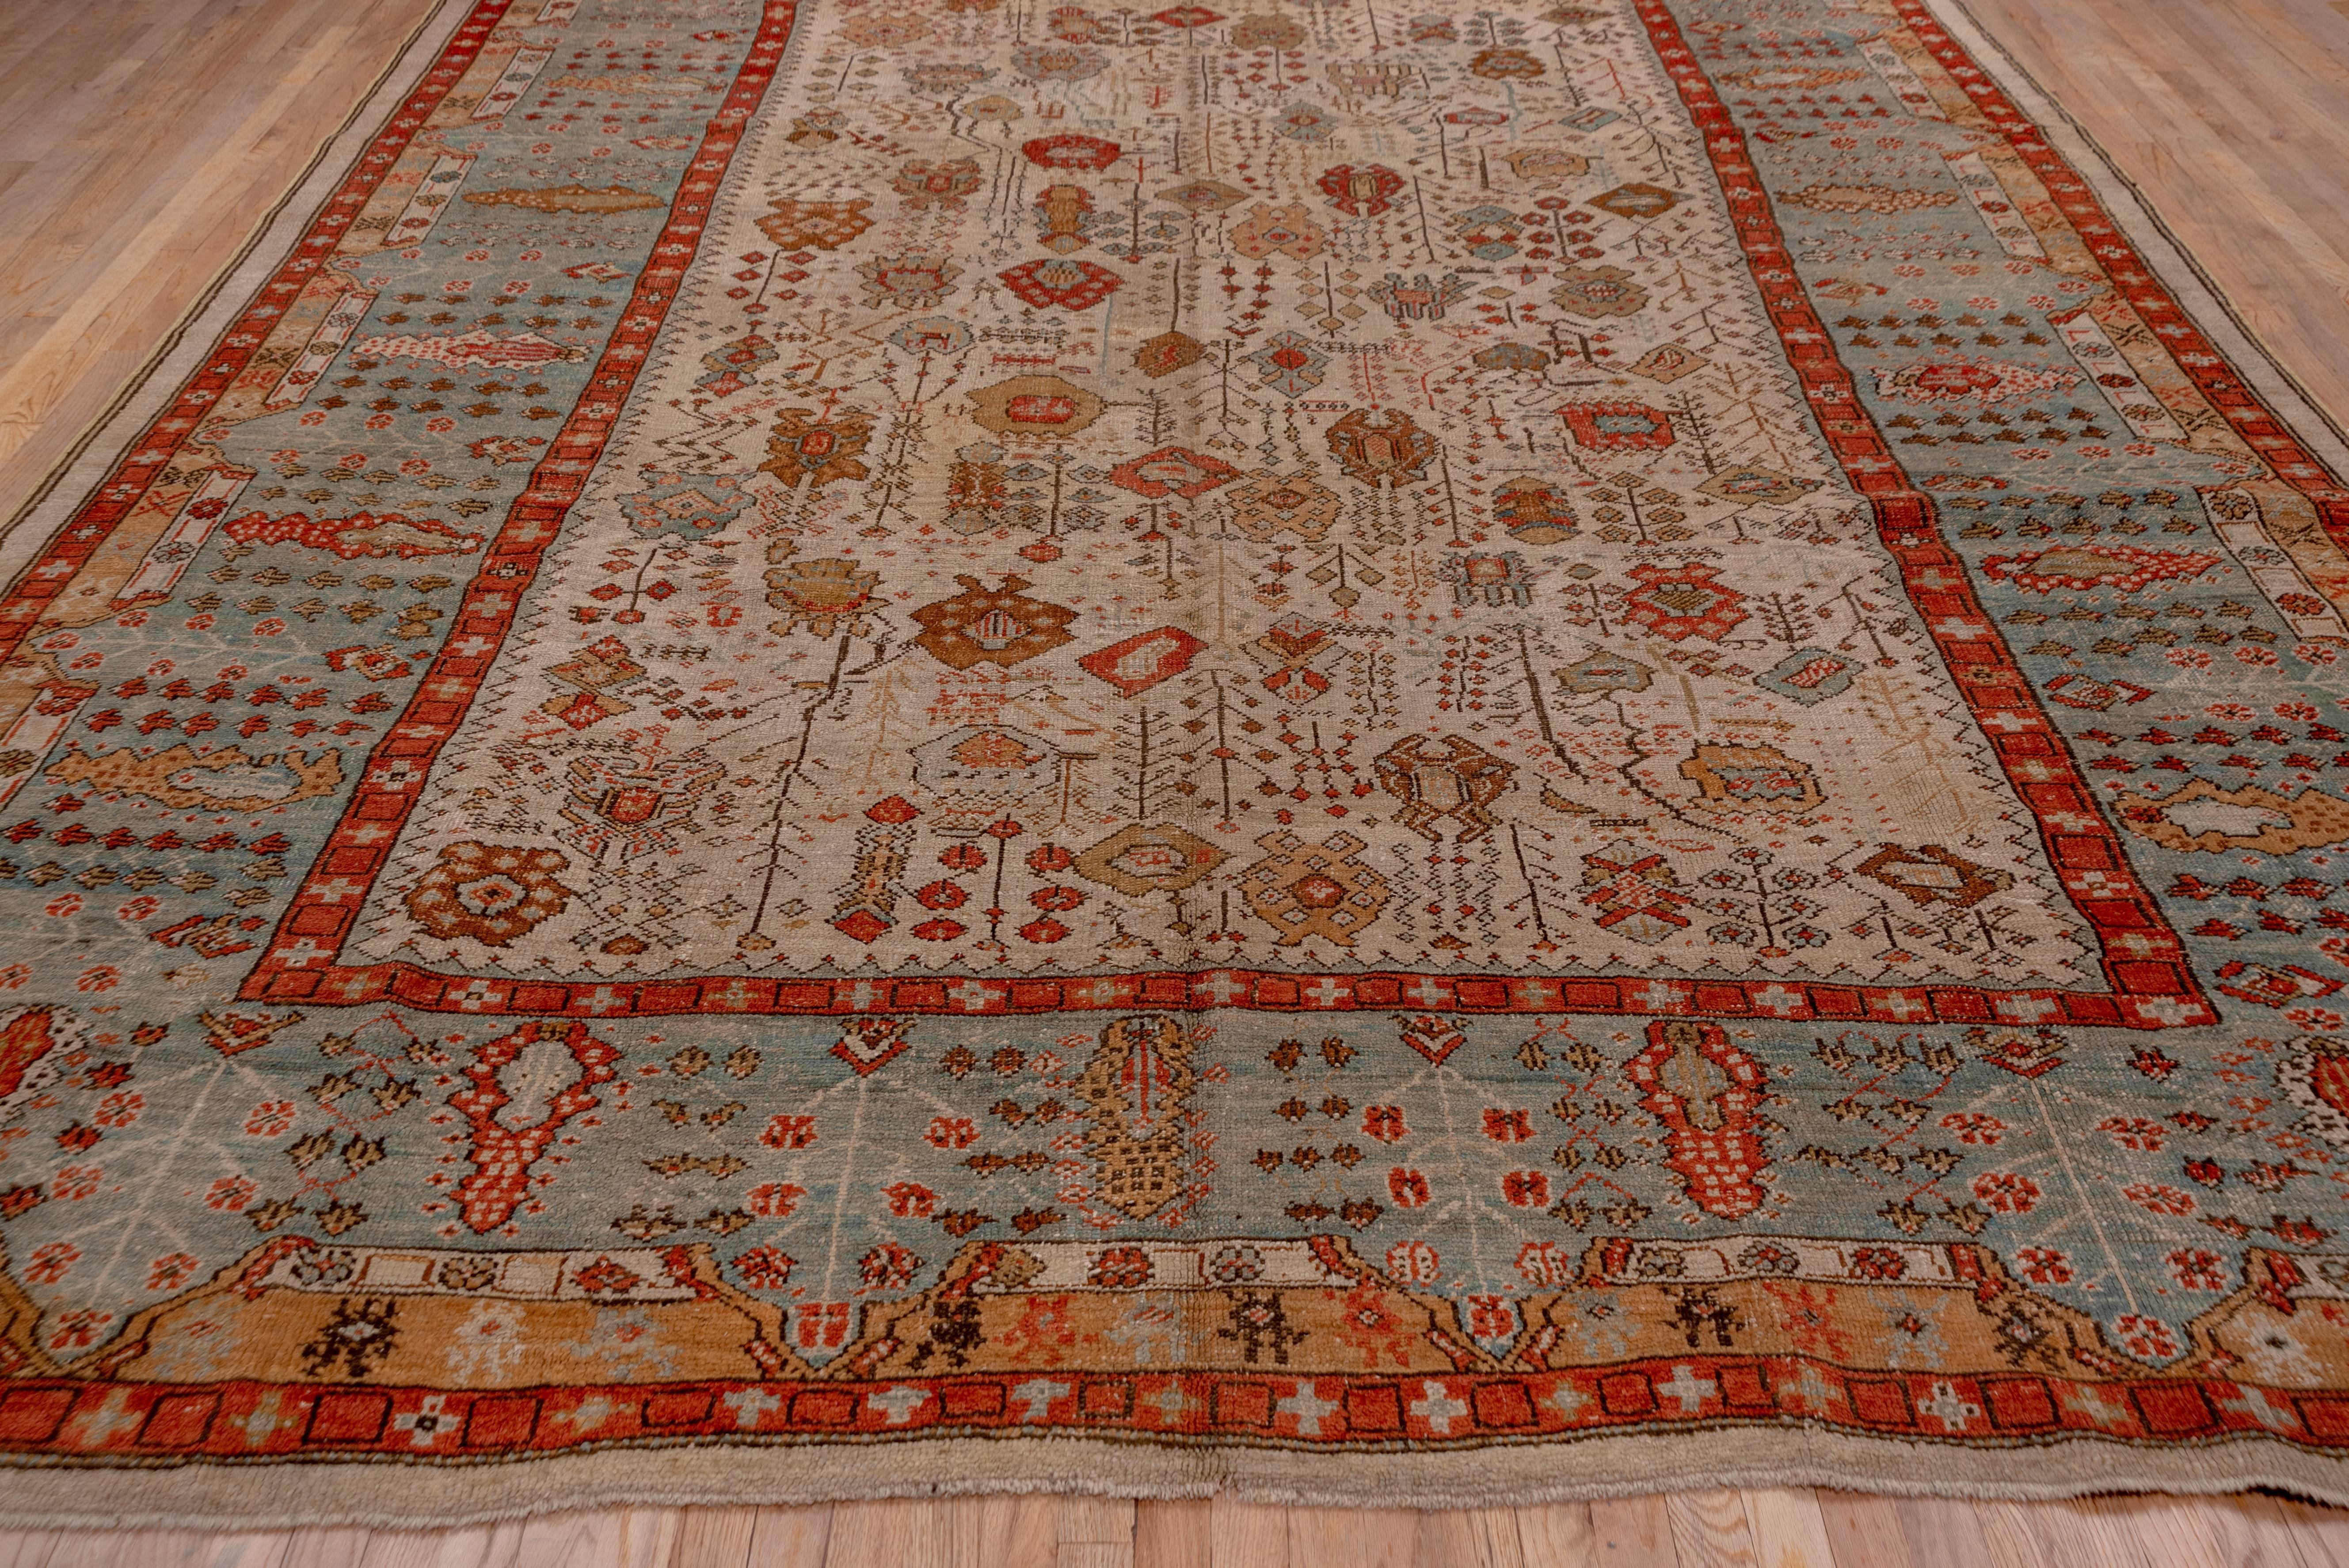 Ghiordes is near to Oushak and influences pass in both directions. This attractive west Anatolian workshop carpet displays a relatively small ivory field decorated with highly abstract palmettes, stem segments, bud arrays and geometric devices. The